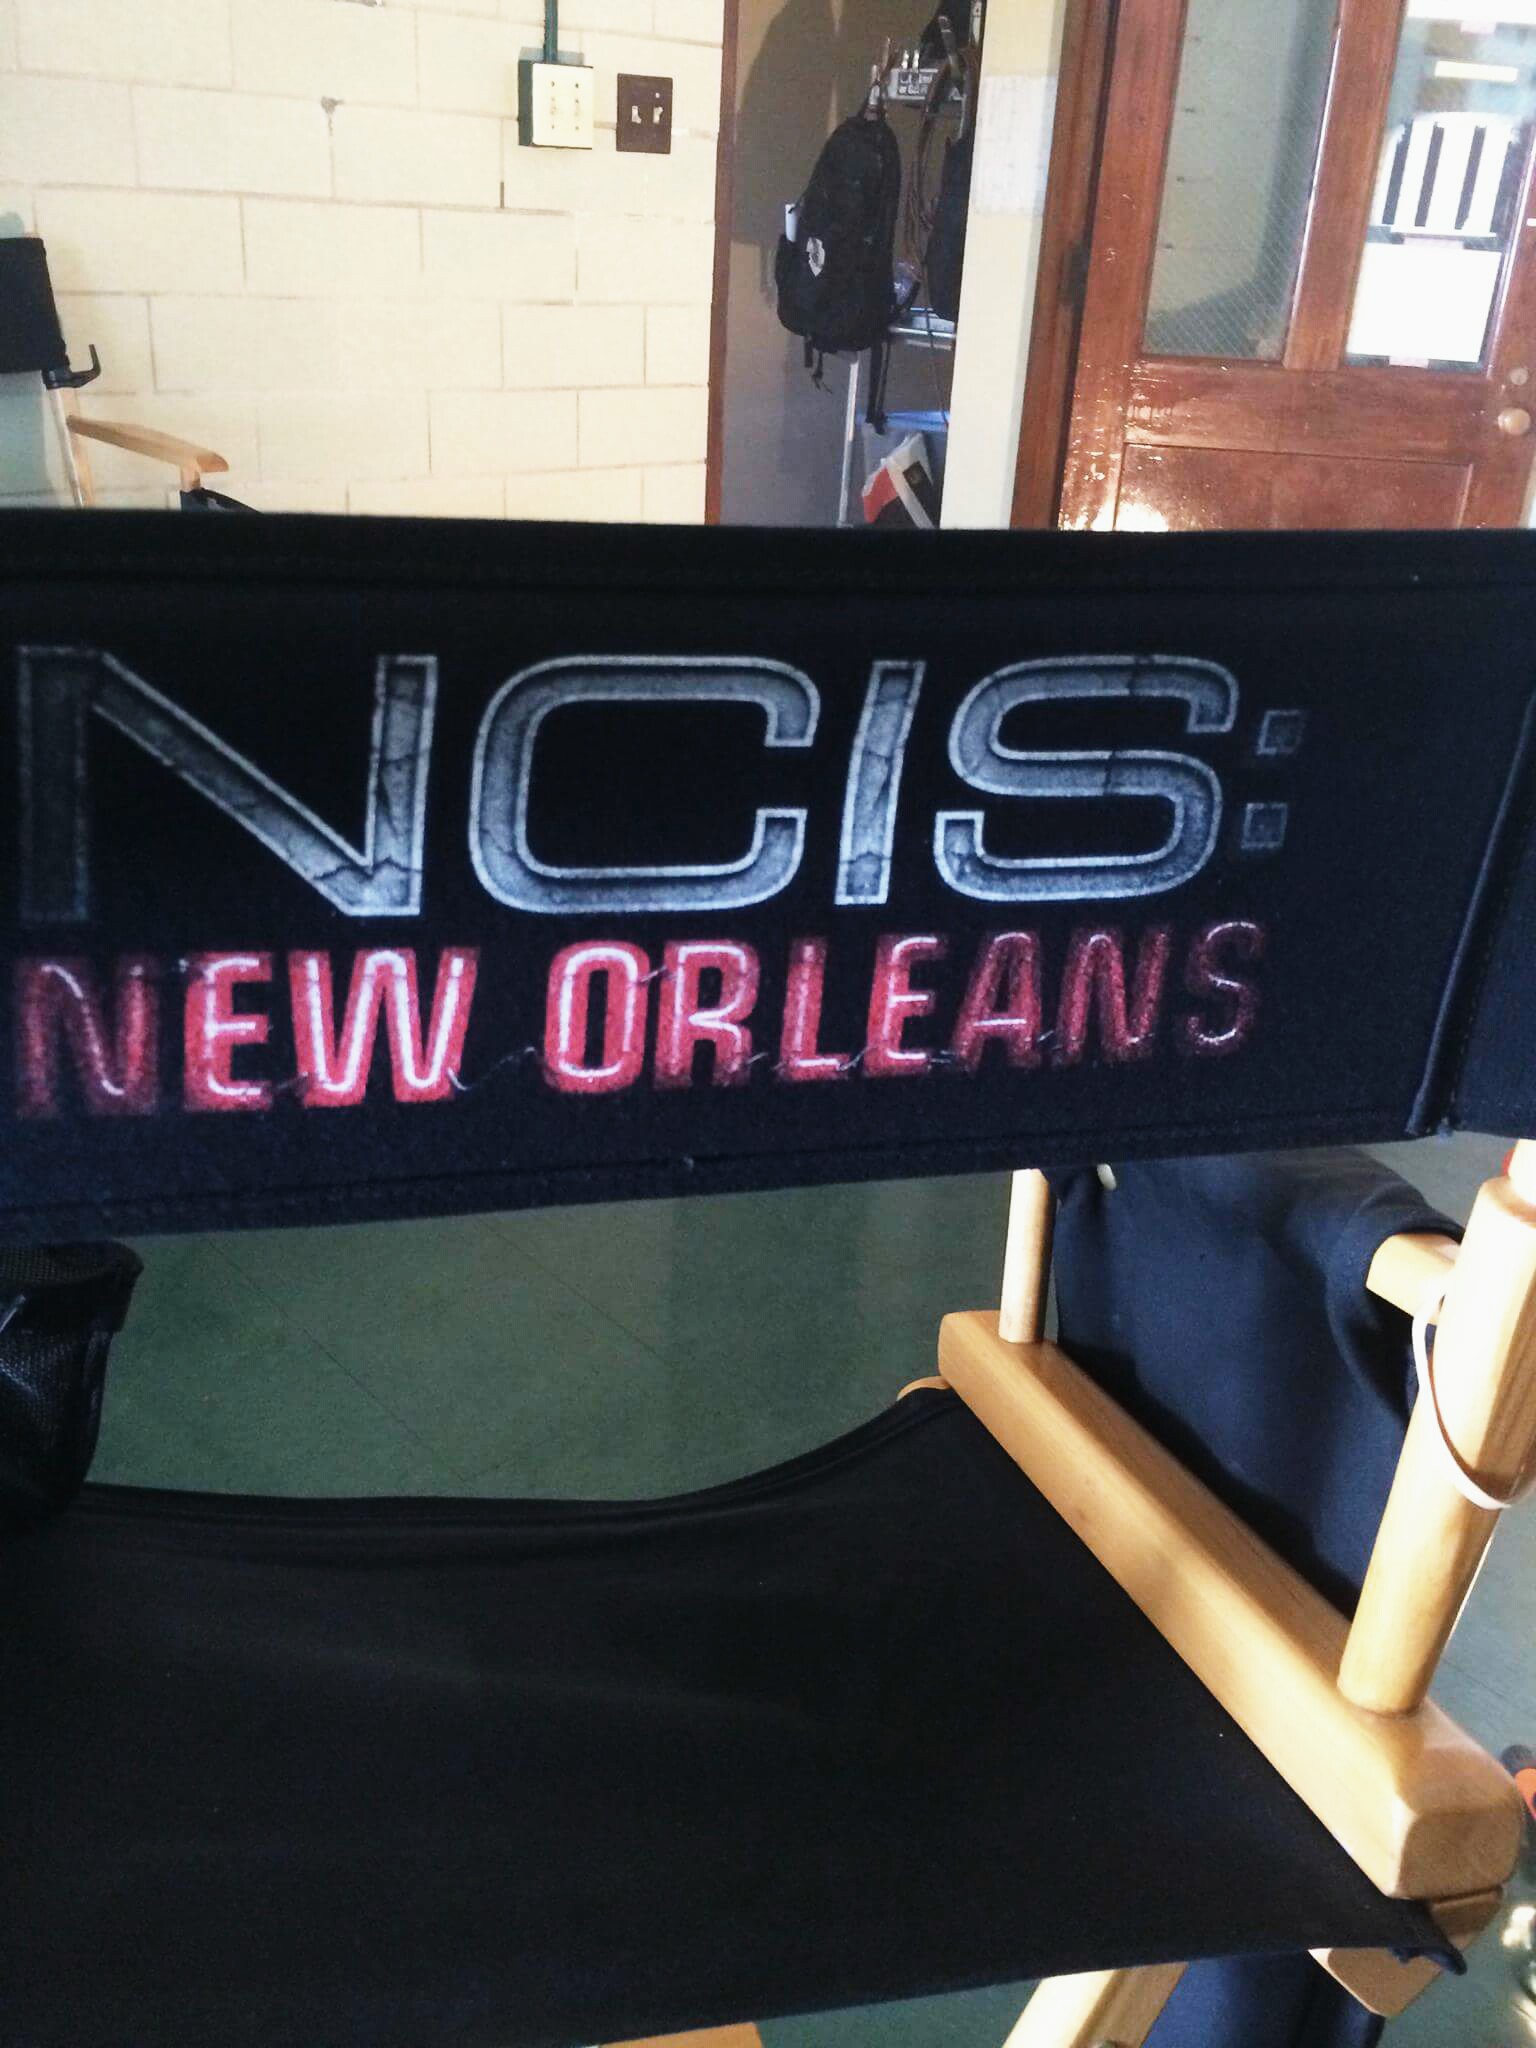 On the set of NCIS New Orleans...